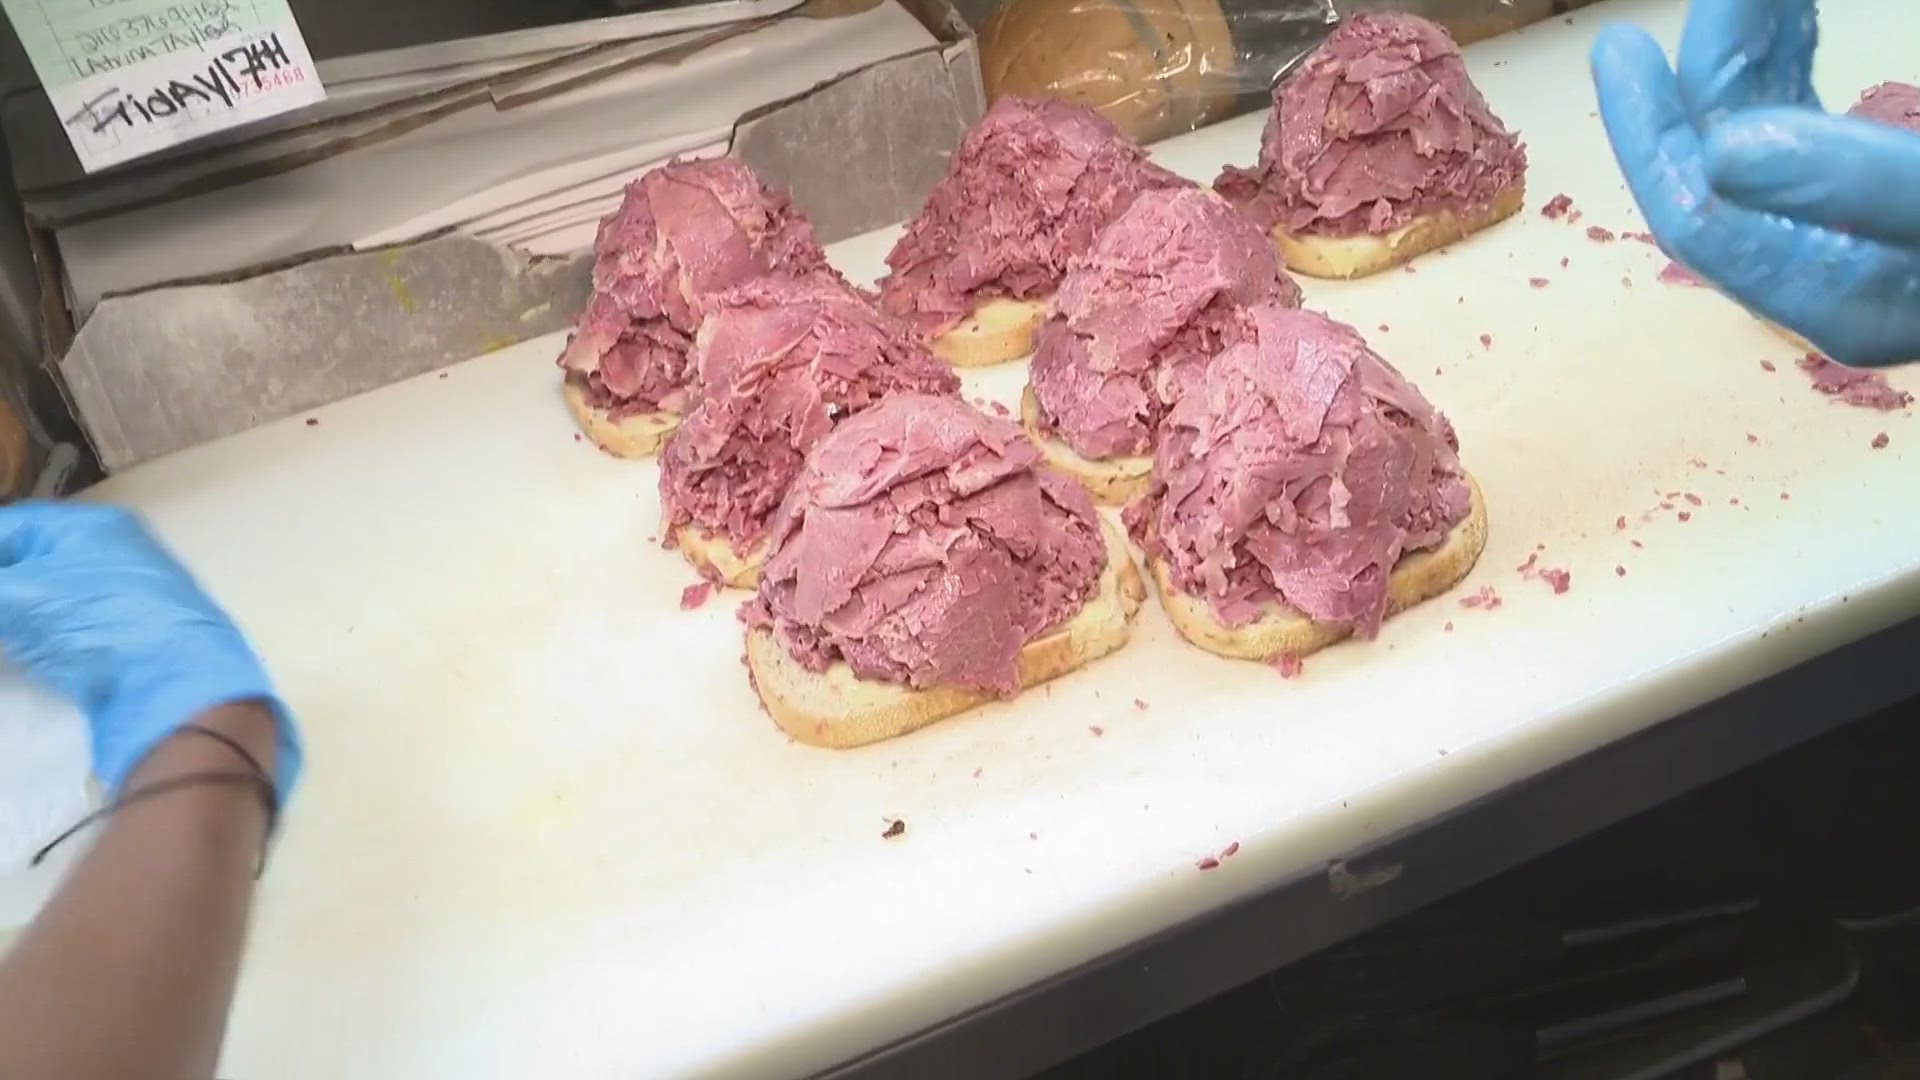 It wouldn't be St. Patrick's Day in Cleveland without a stop at Slyman's. 3News' Austin Love is there to show off their iconic corned beef sandwiches.